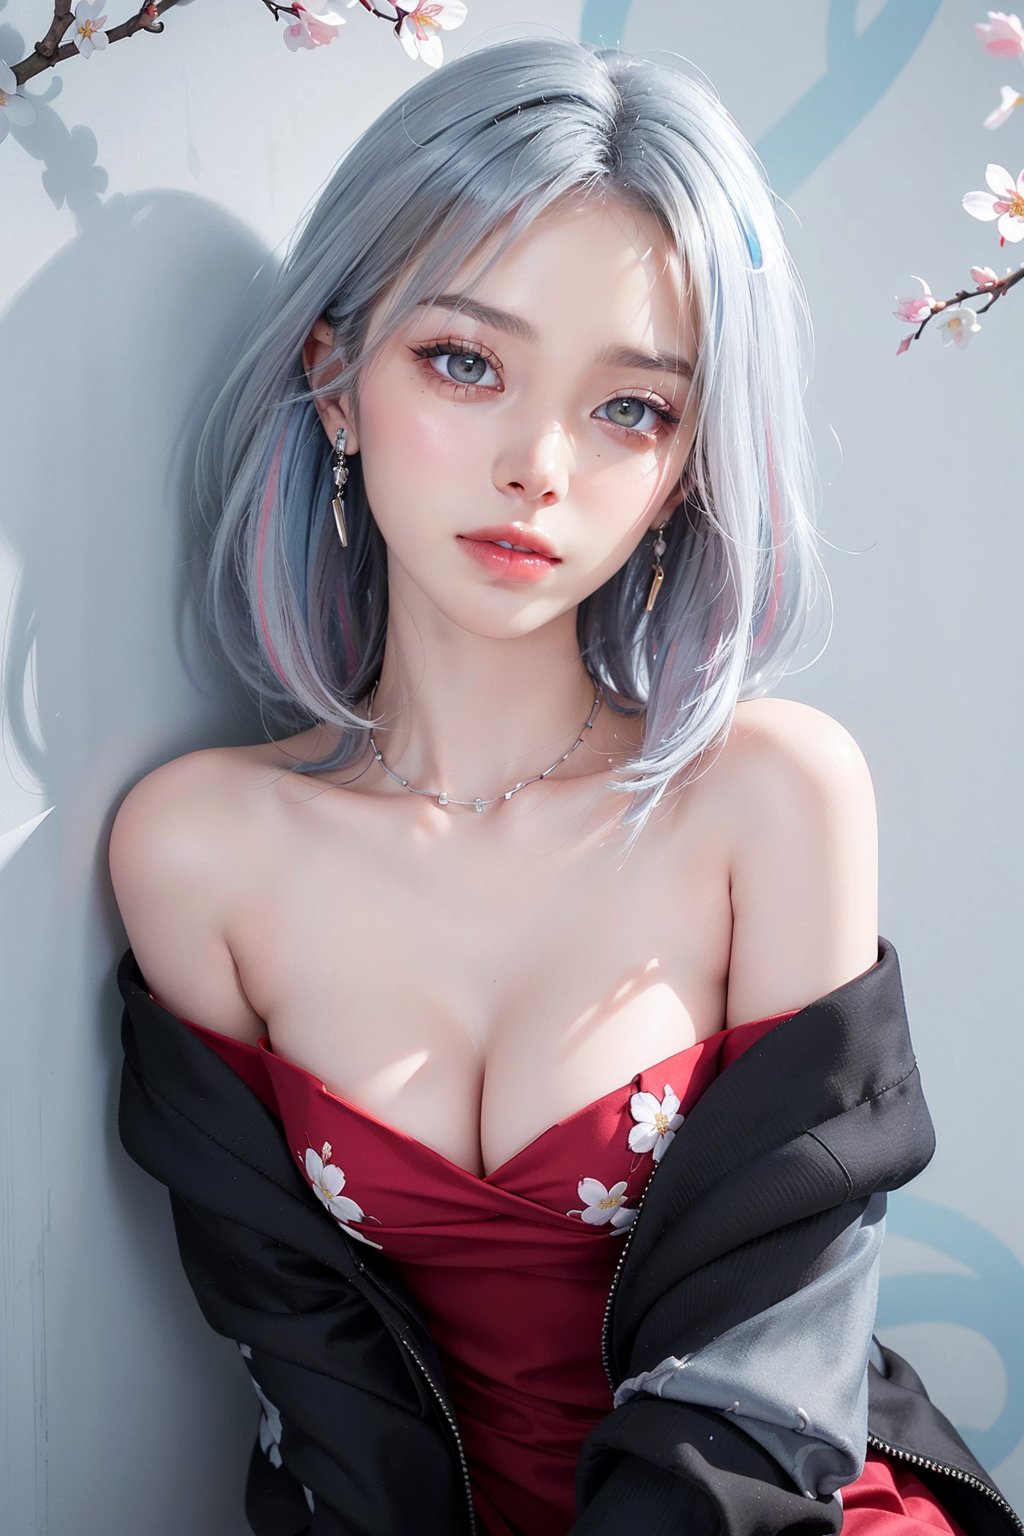 blush, blue eye, (white and blue highlight hair: 1.4), Donatella Versace designed: ((Luxurious off shoulder black jacket)) and ((Luxurious red frock)), messy_hair, (( cherry blossoms art wall background)), kissing expression in her face, (dynamic posing), navel,medium full shot